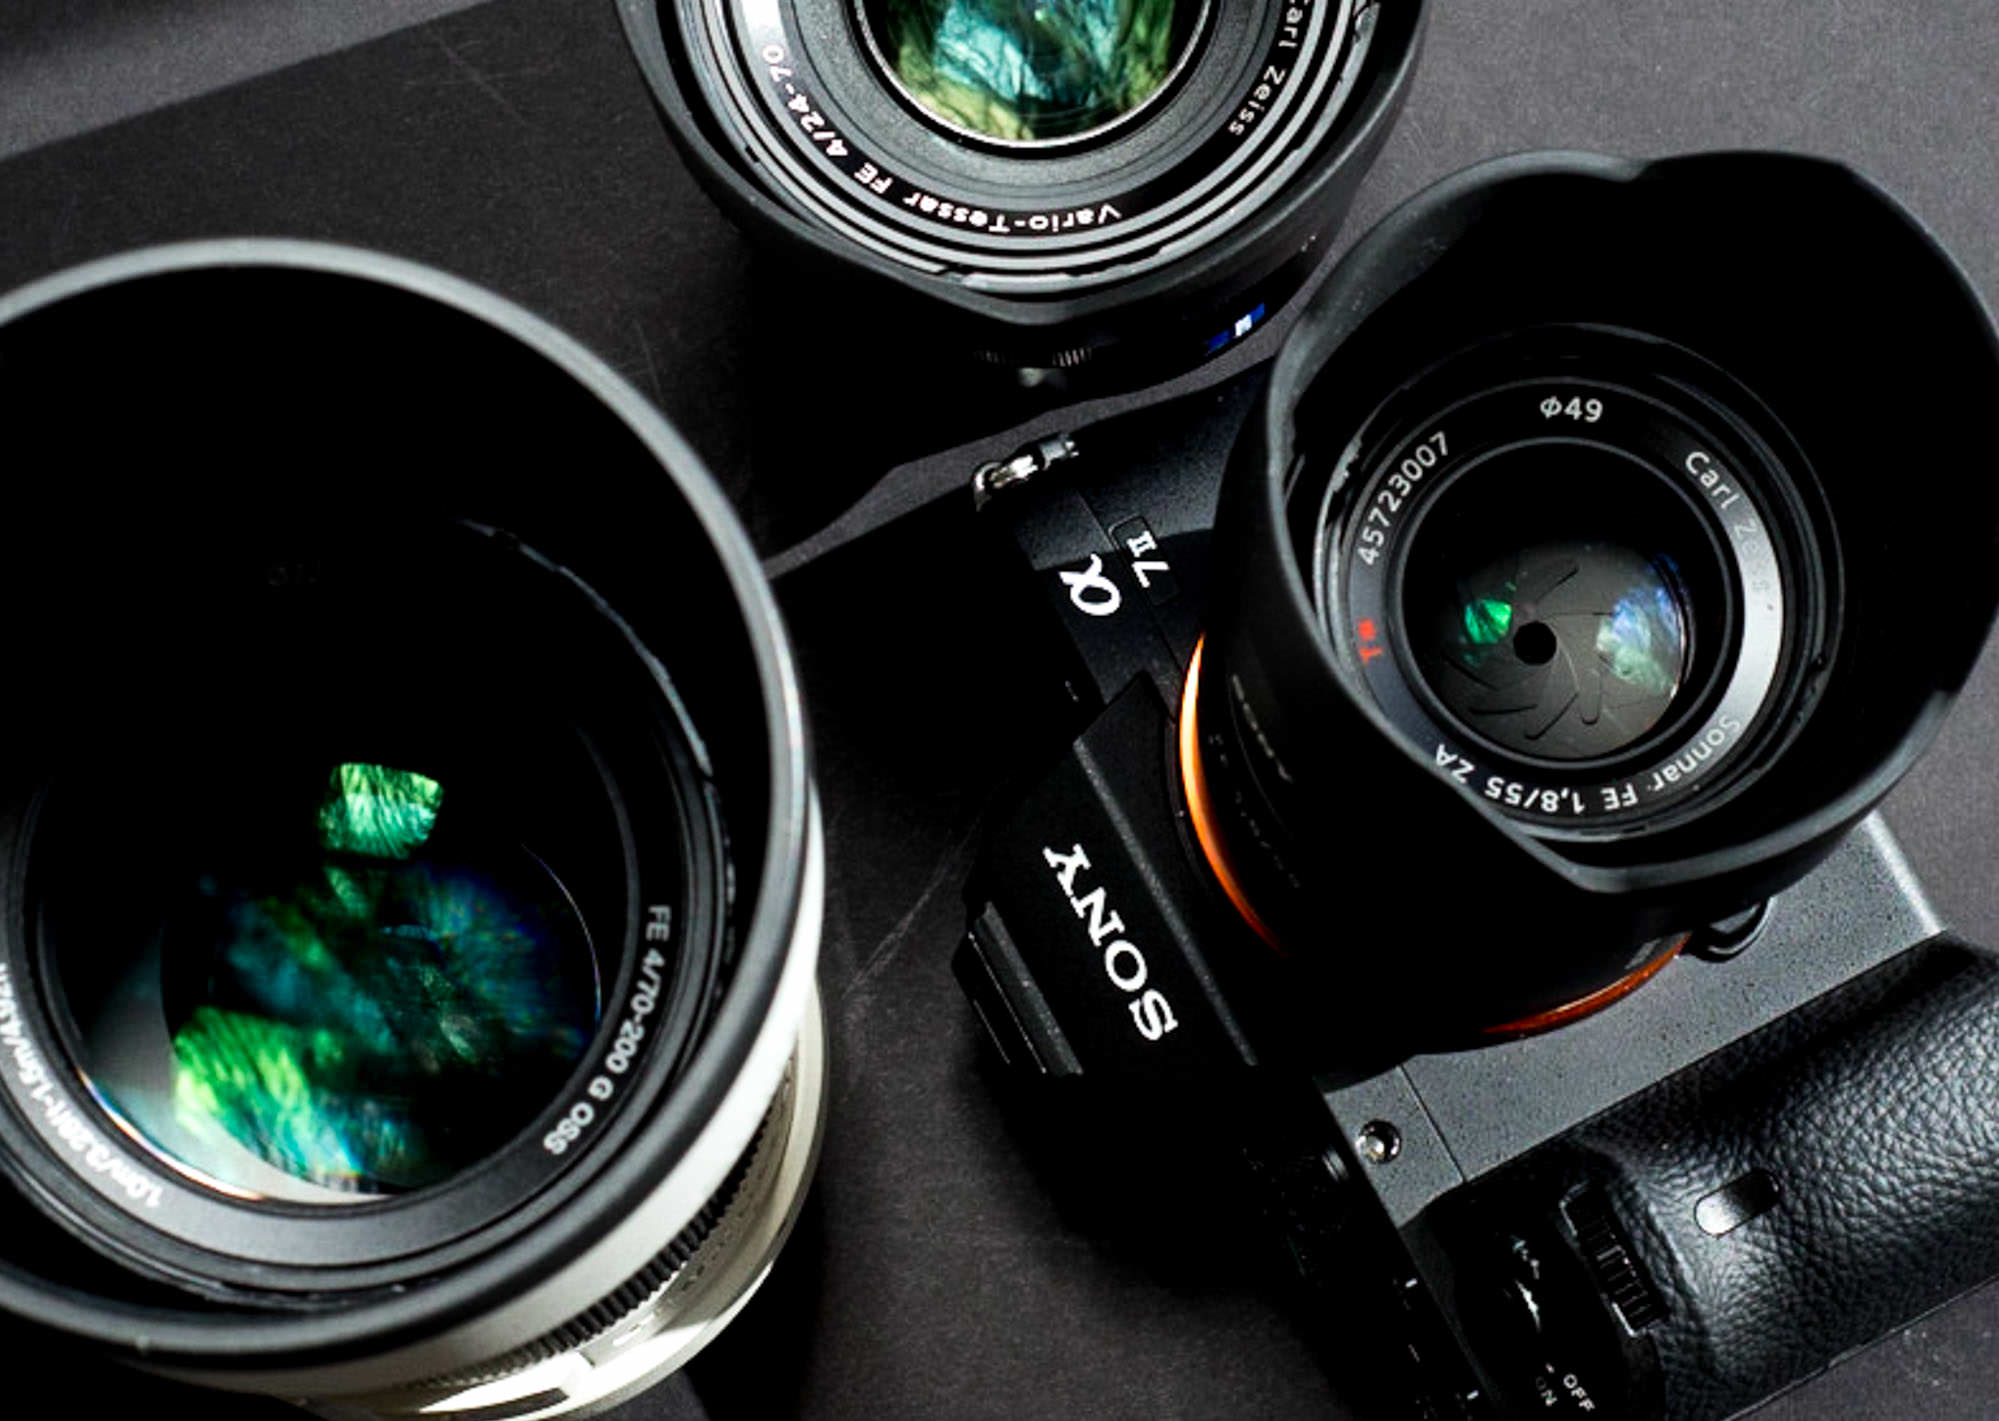 Sony A7 Series, Sony A7ii Landscape Lens